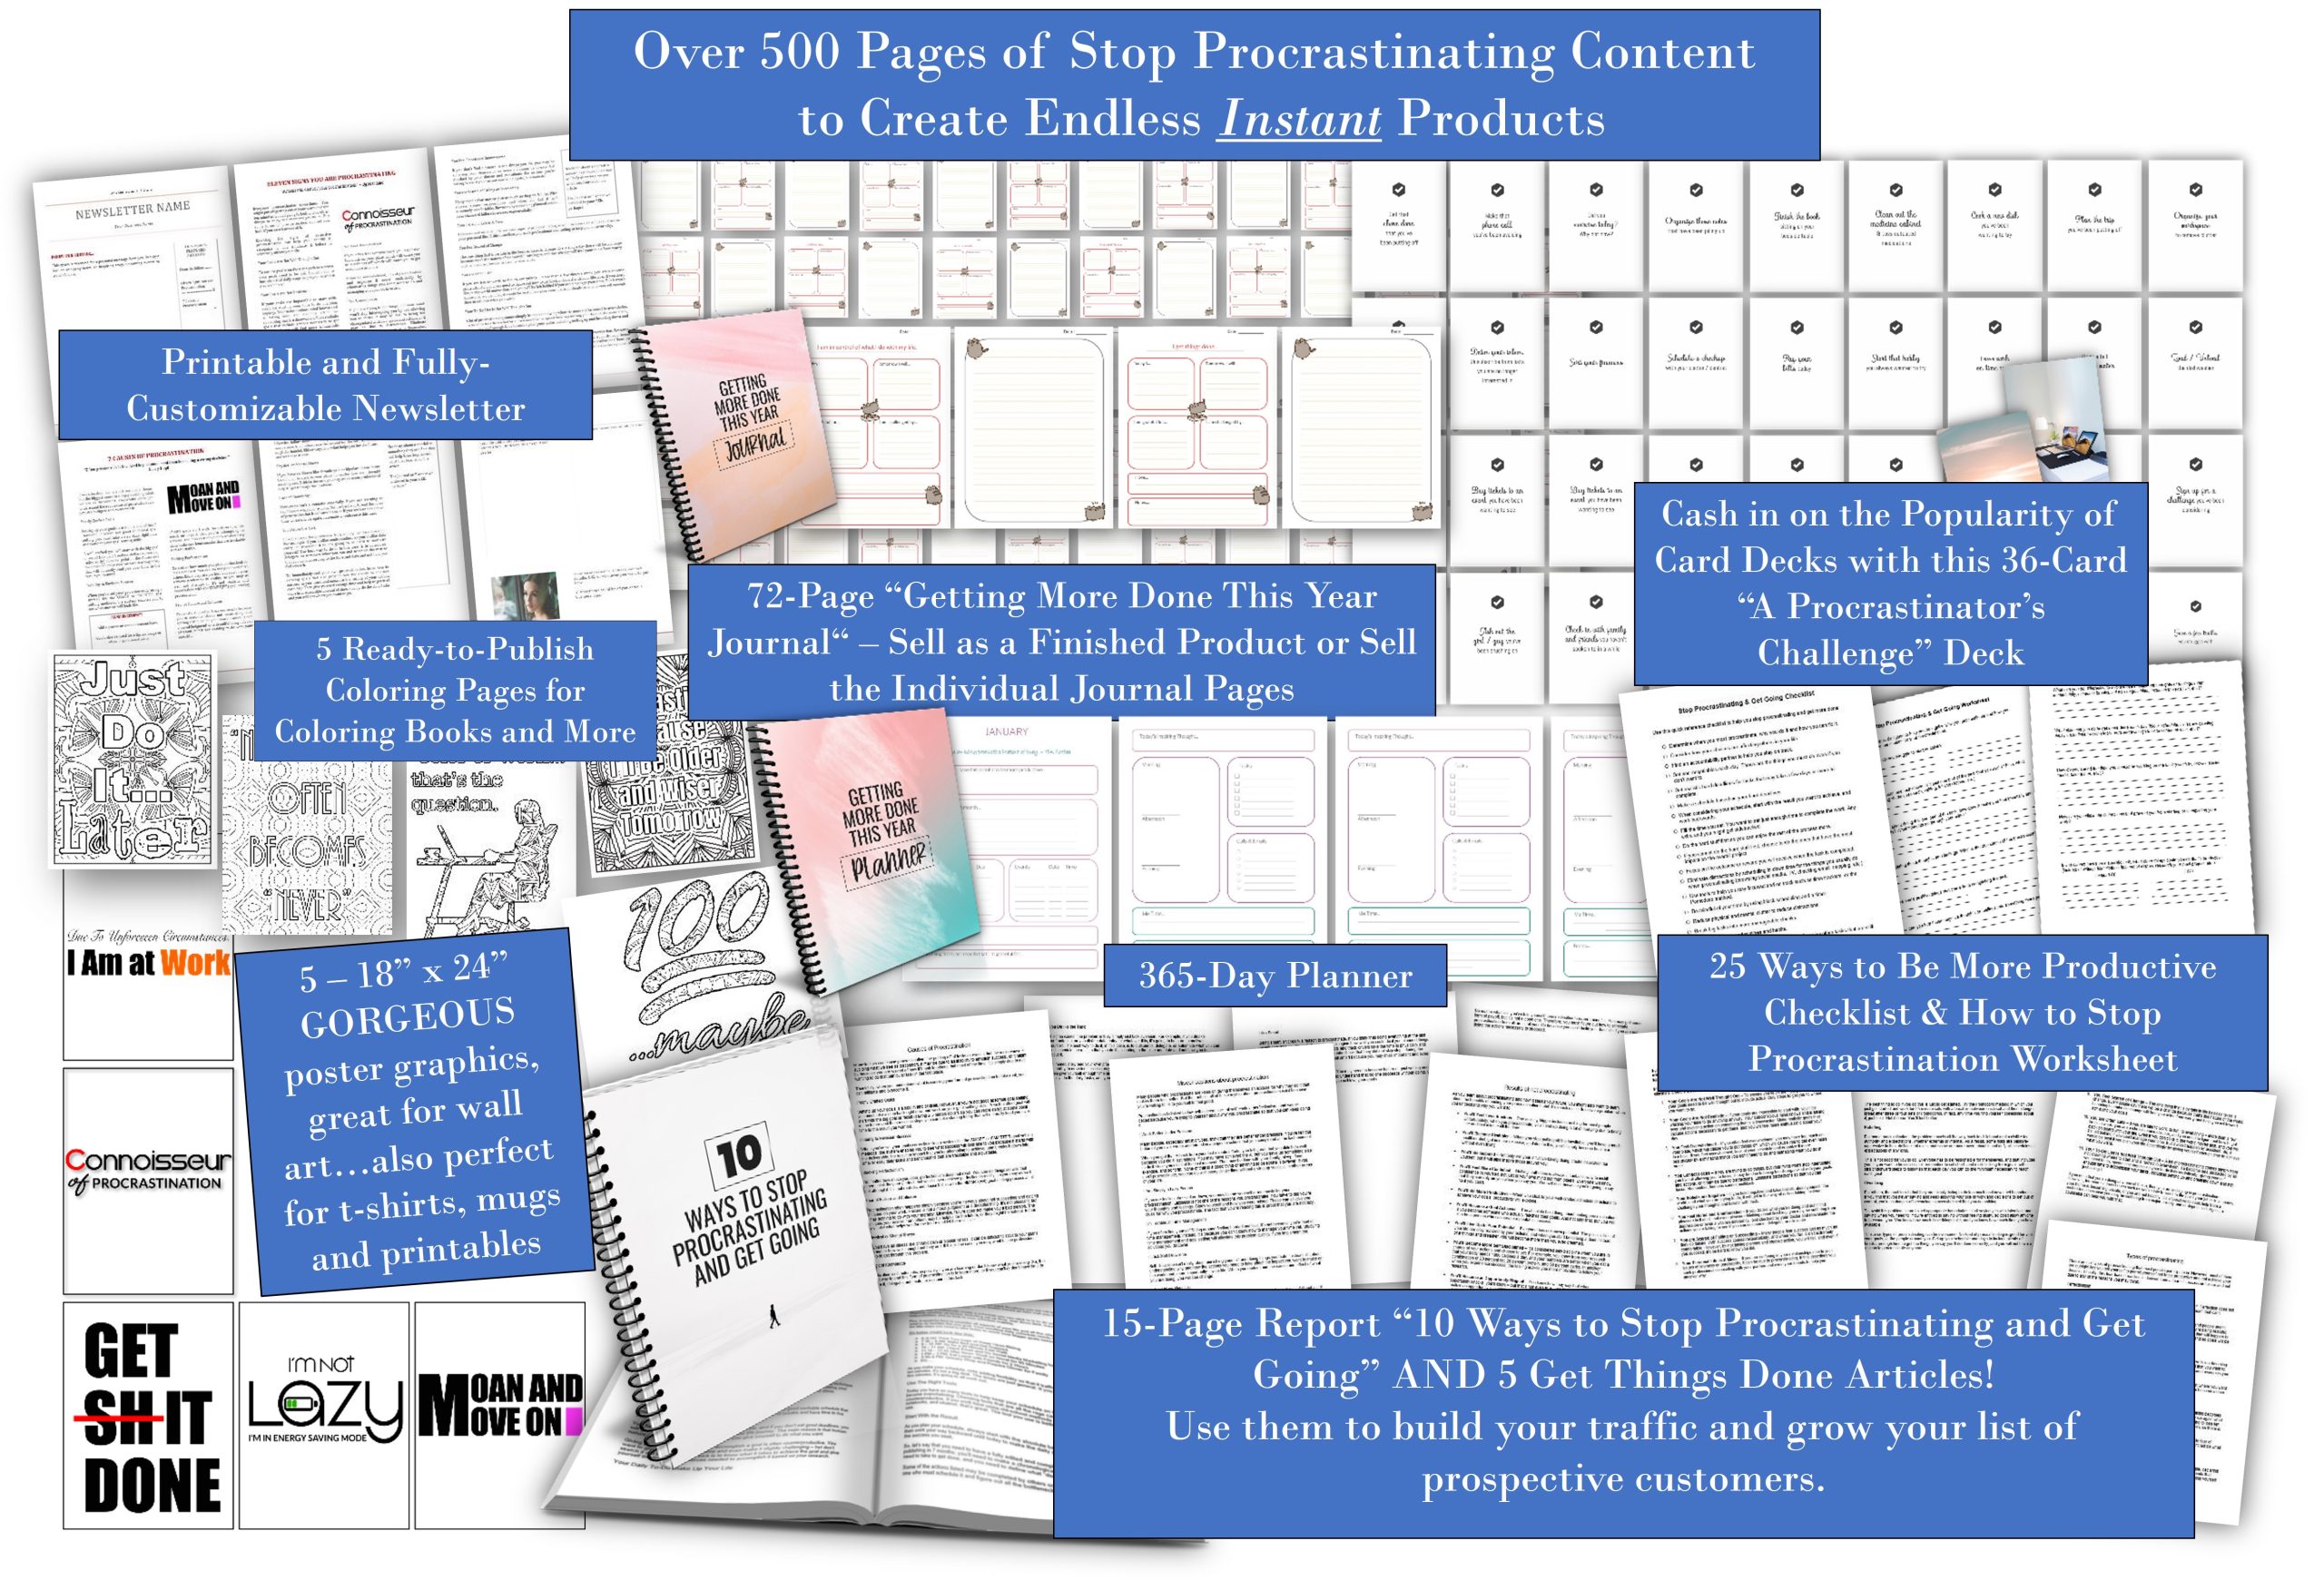 Done-for-You PLR Content